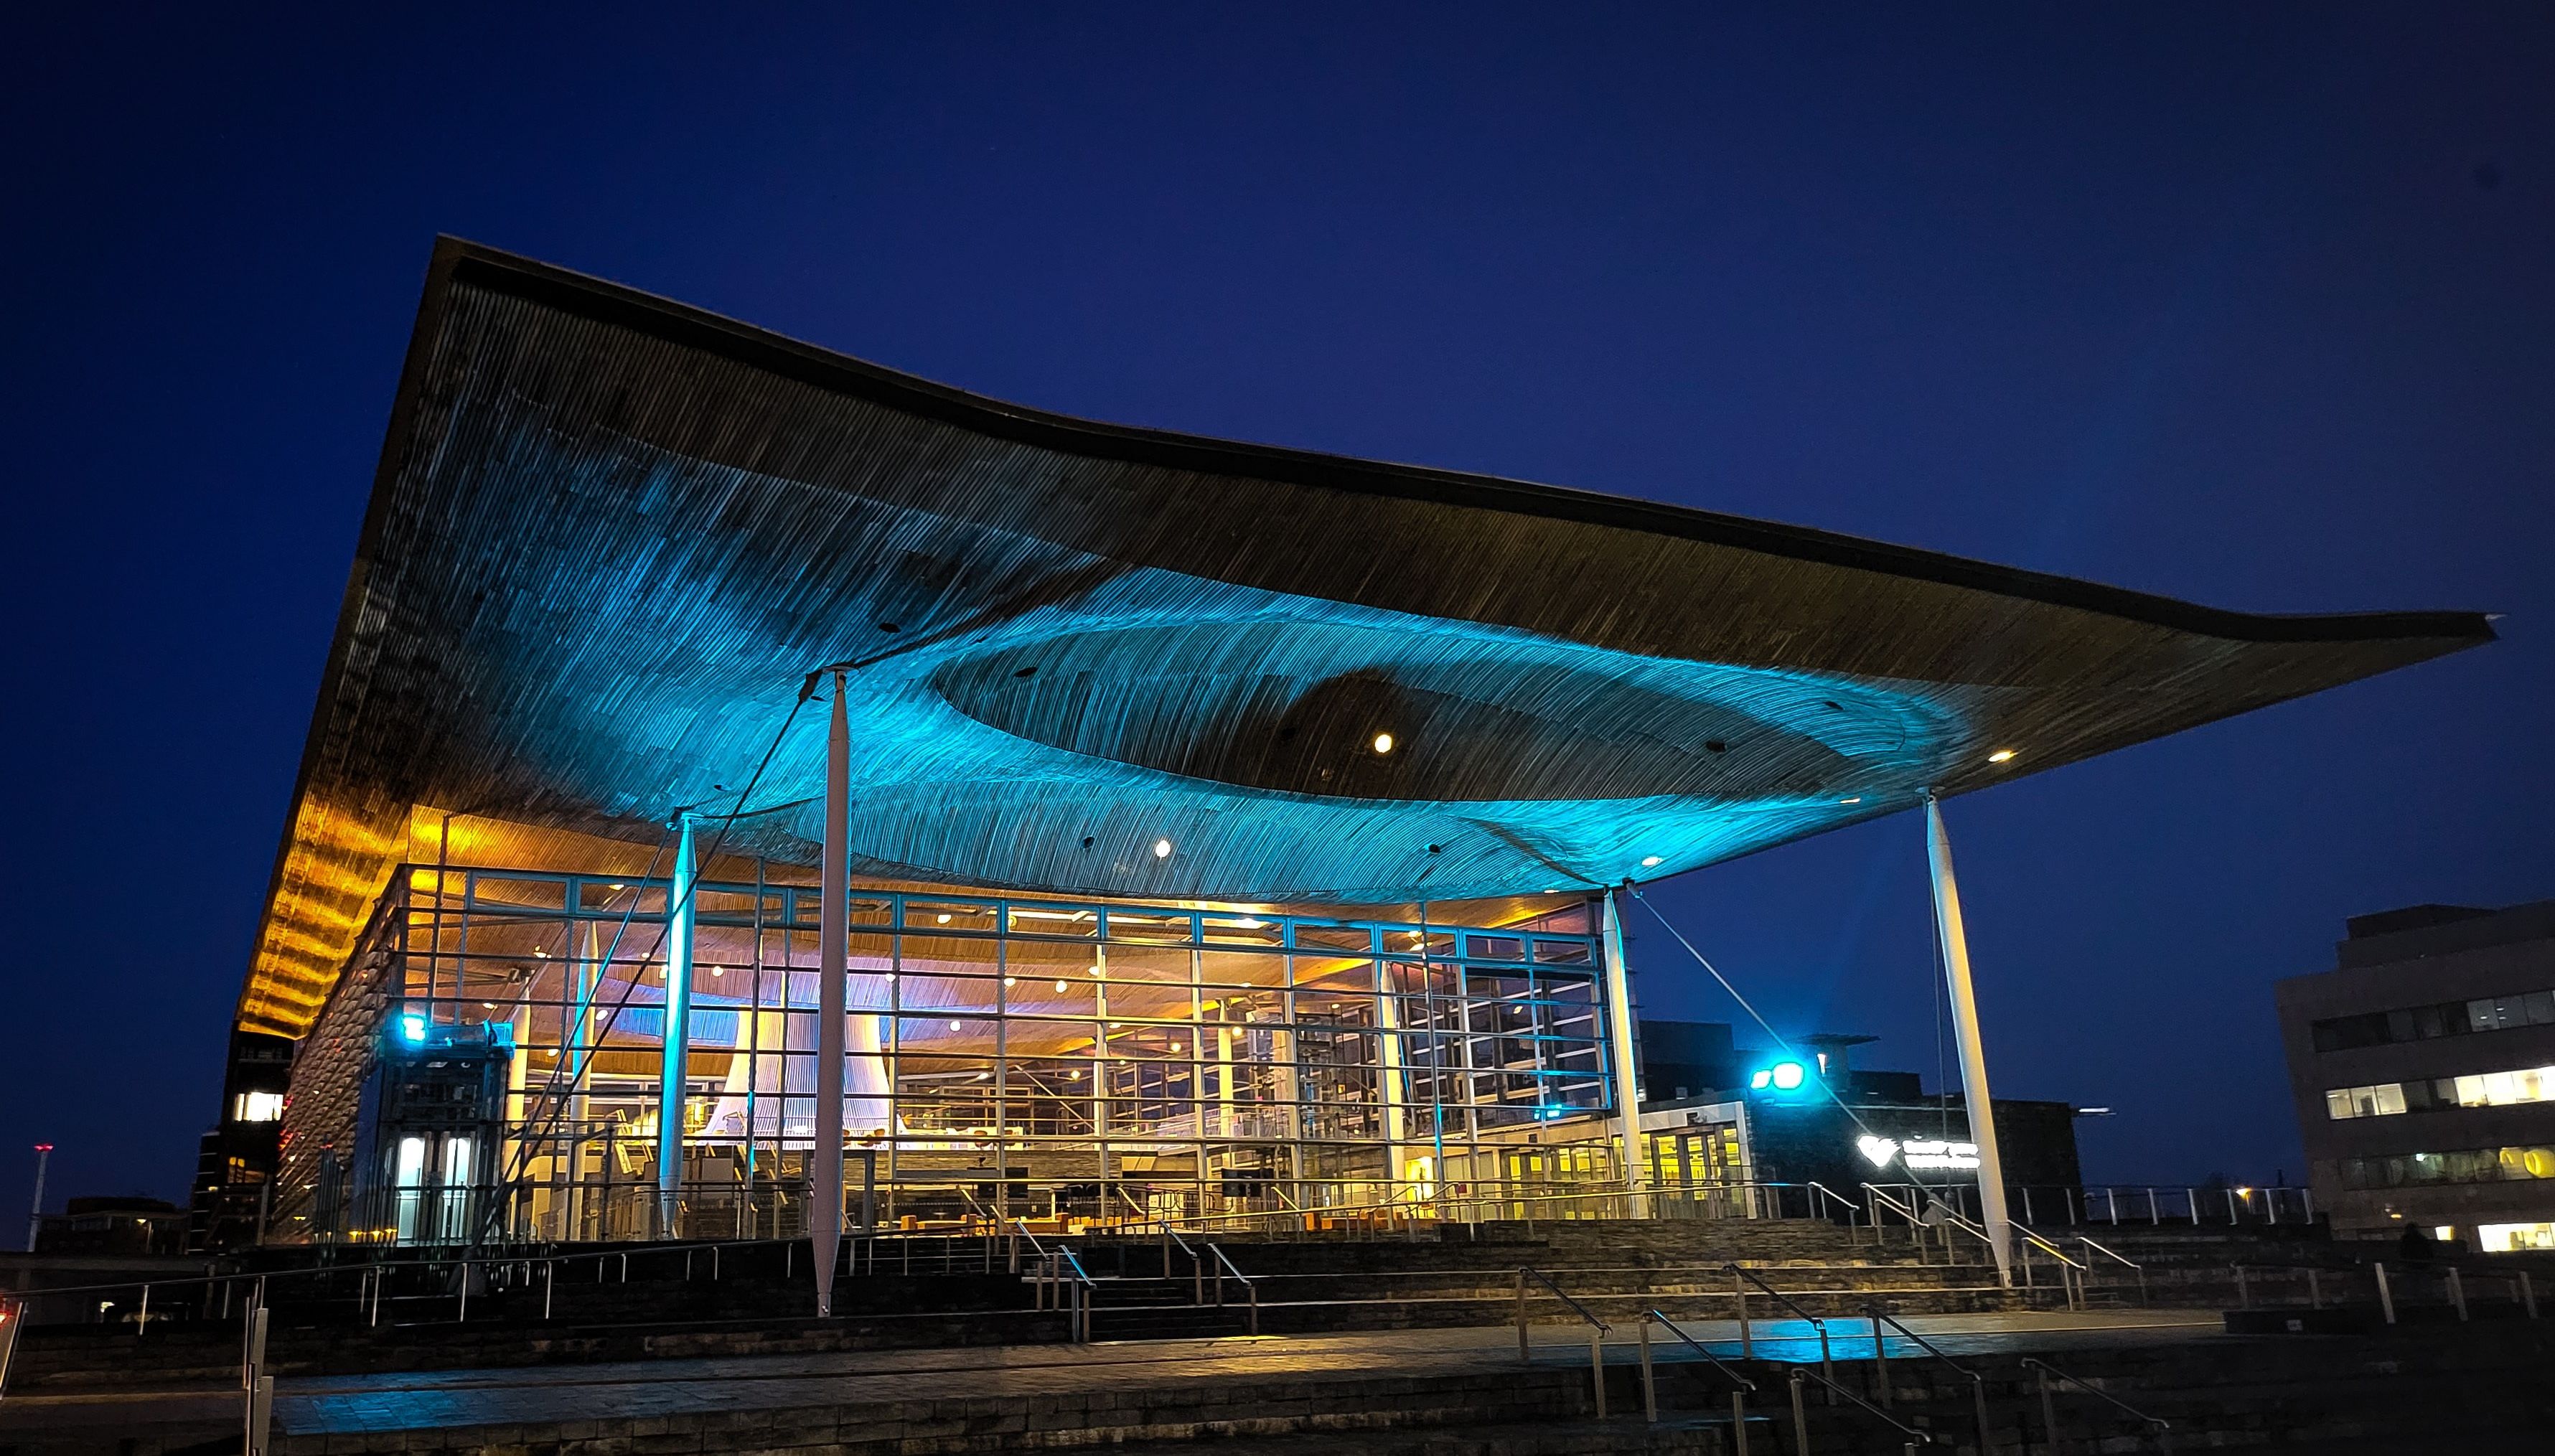 The Senedd in Cardiff where the Welsh Government sits.